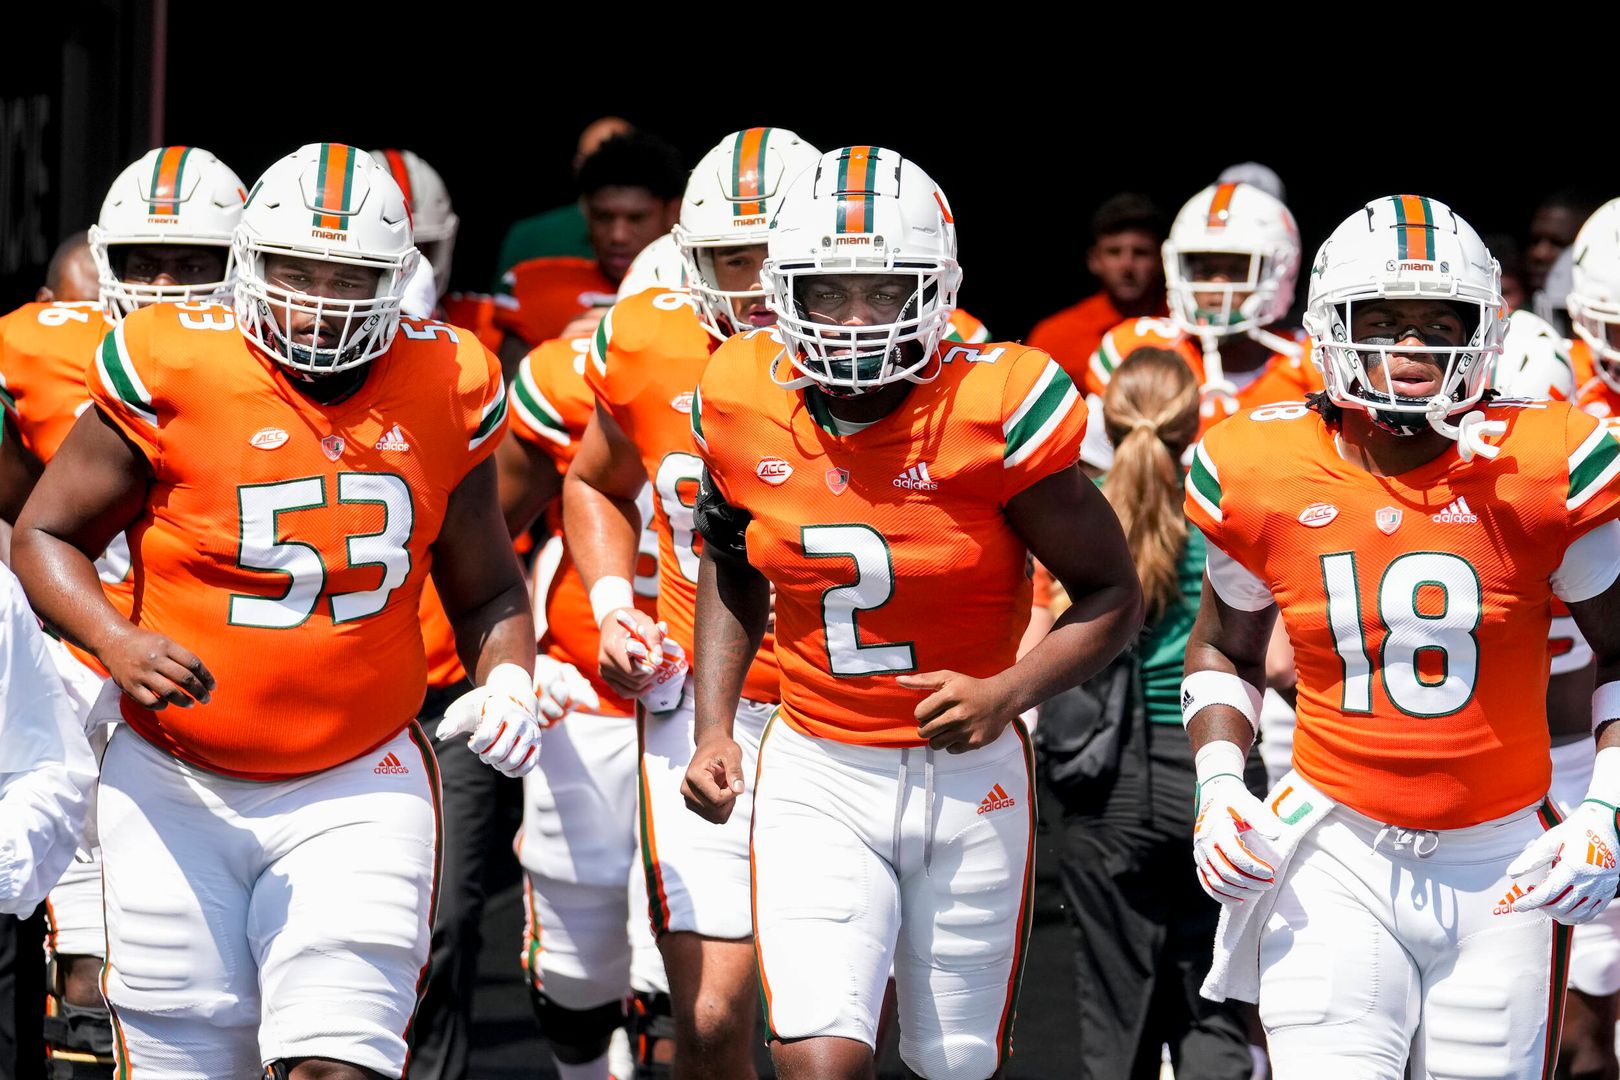 Canes Set for Rivalry Matchup Against Florida State